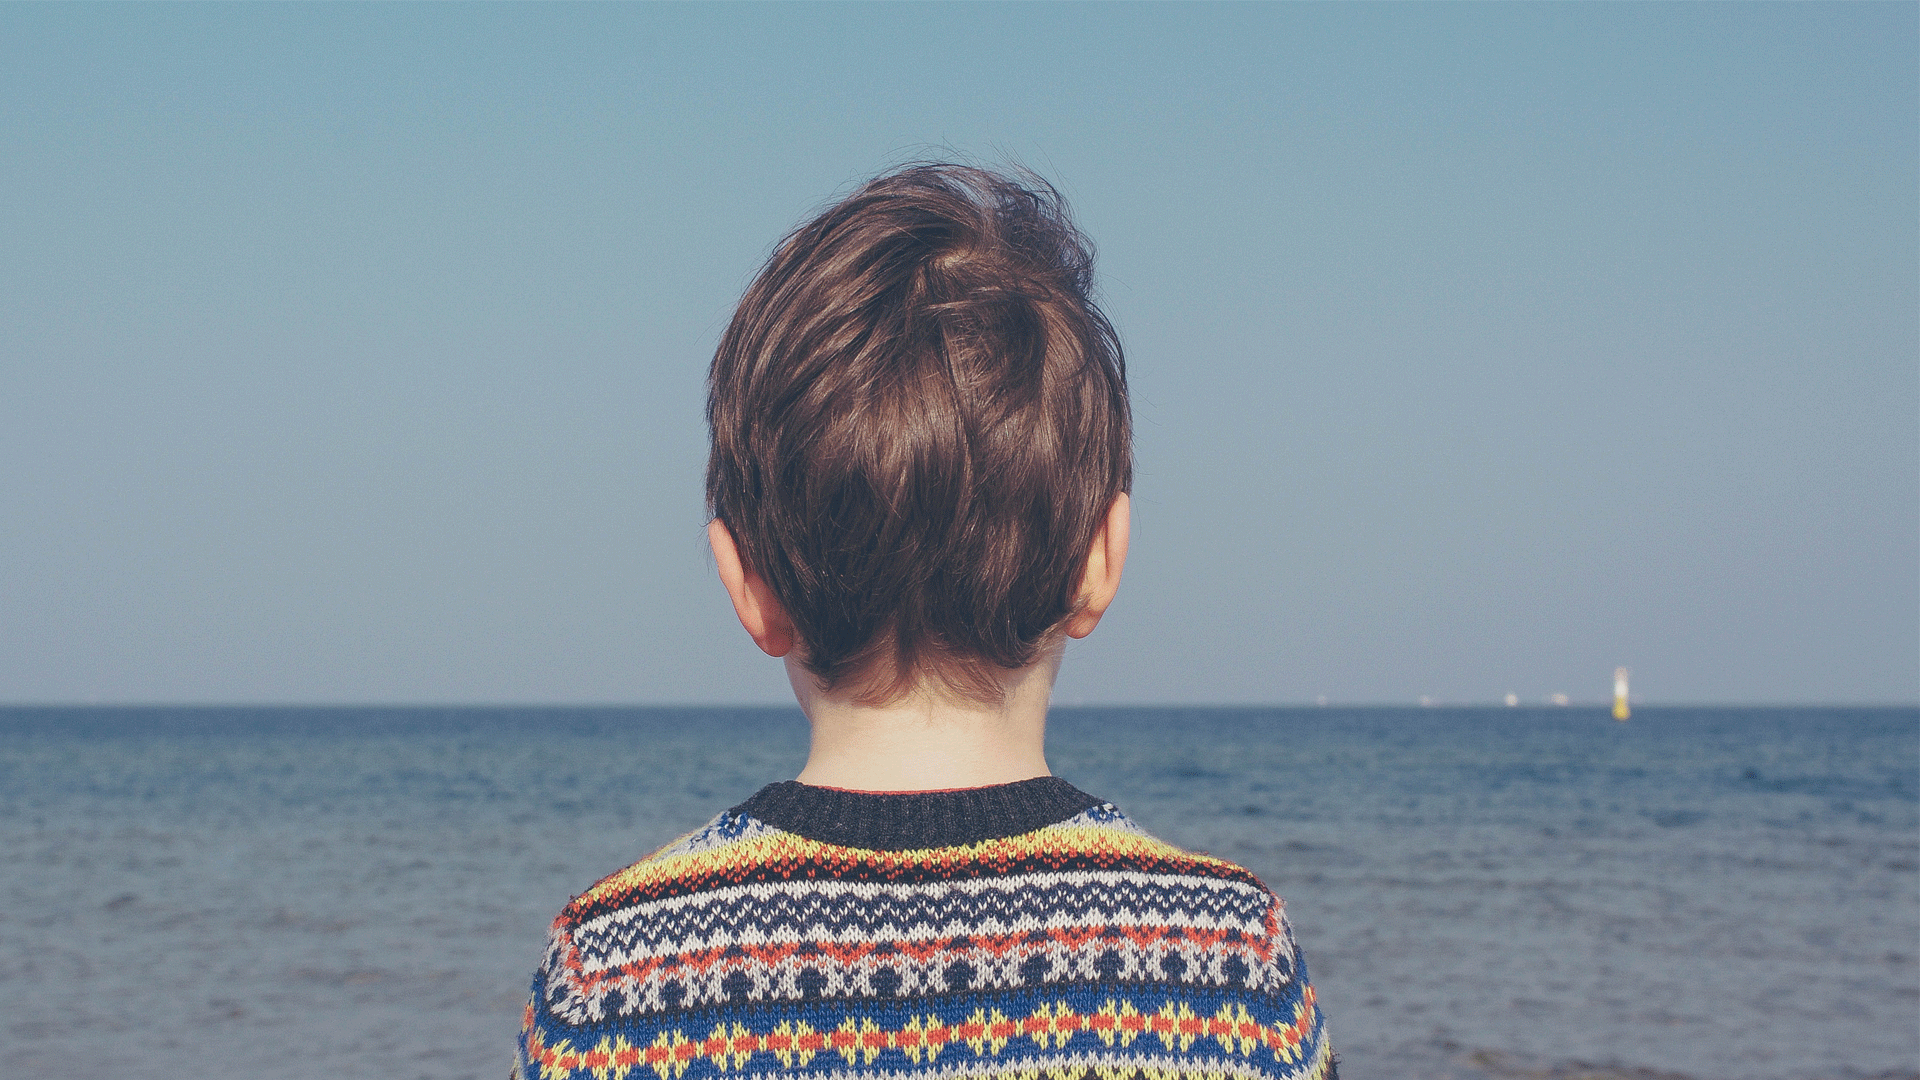 5 Ways To Recognise Mental Health Issues In Your Child